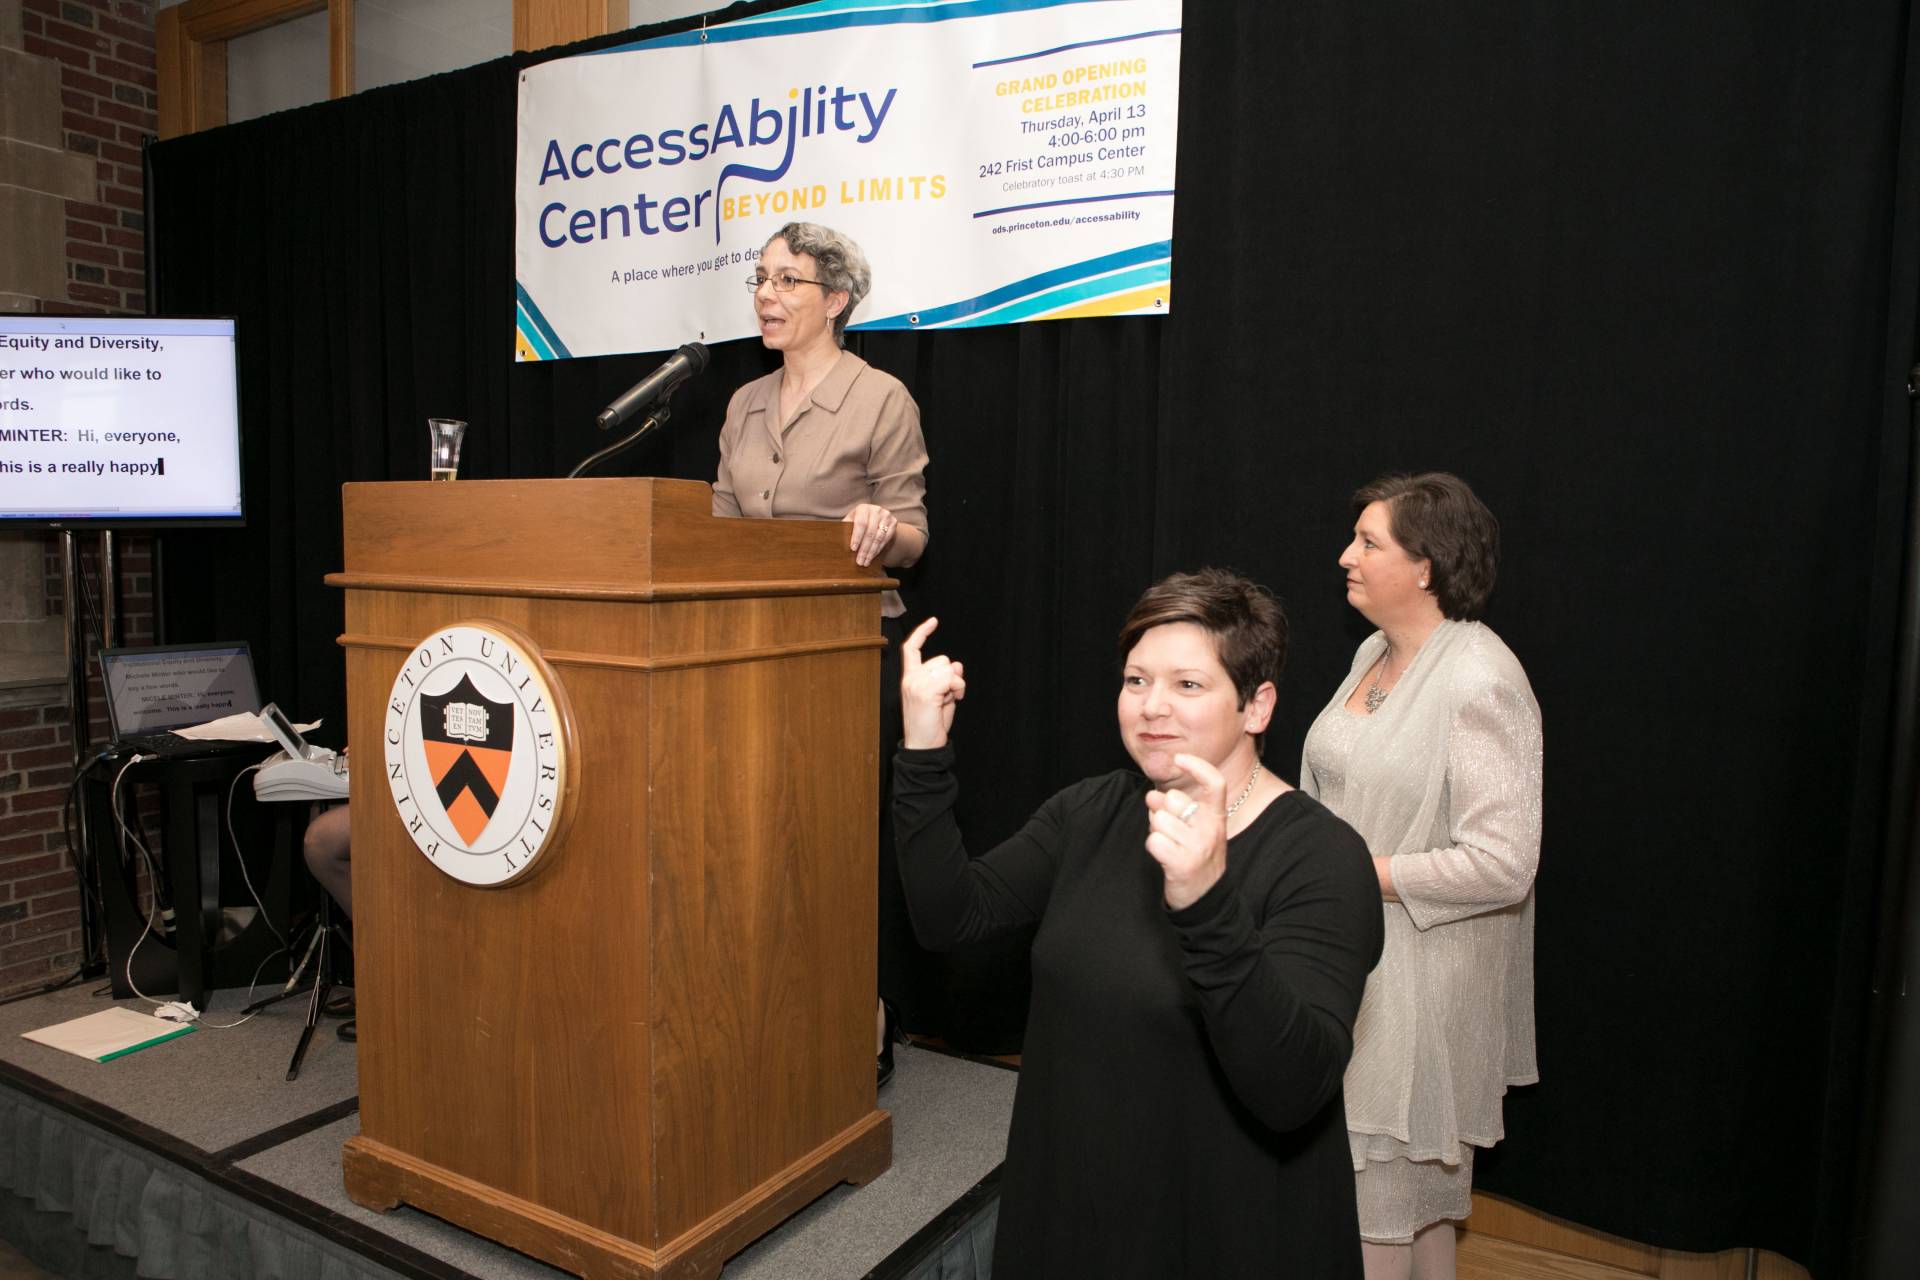 Michele Minter at podium at AccessAbility Center opening